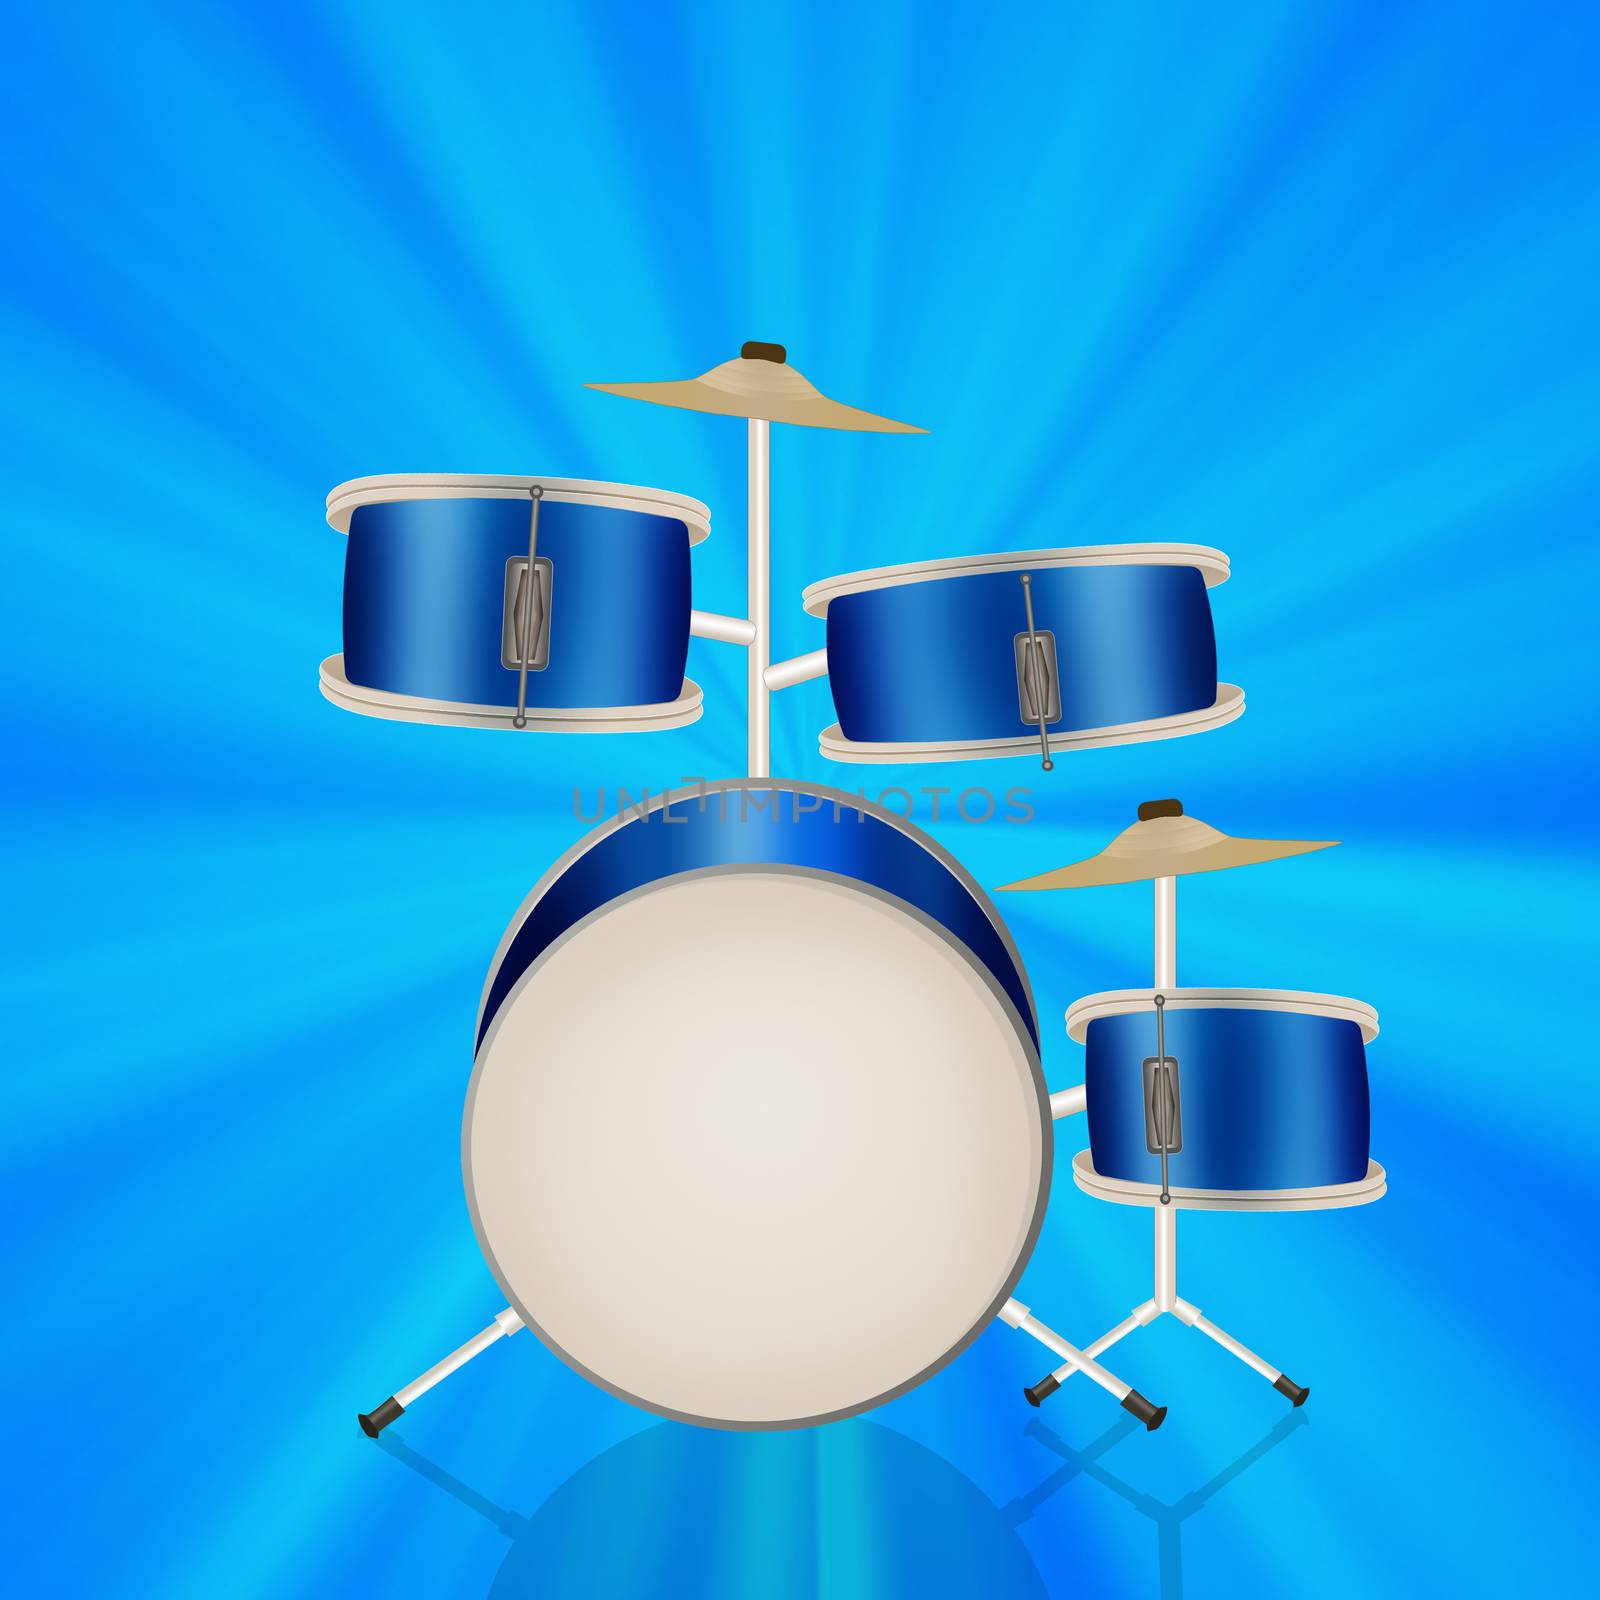 illustration of play drums